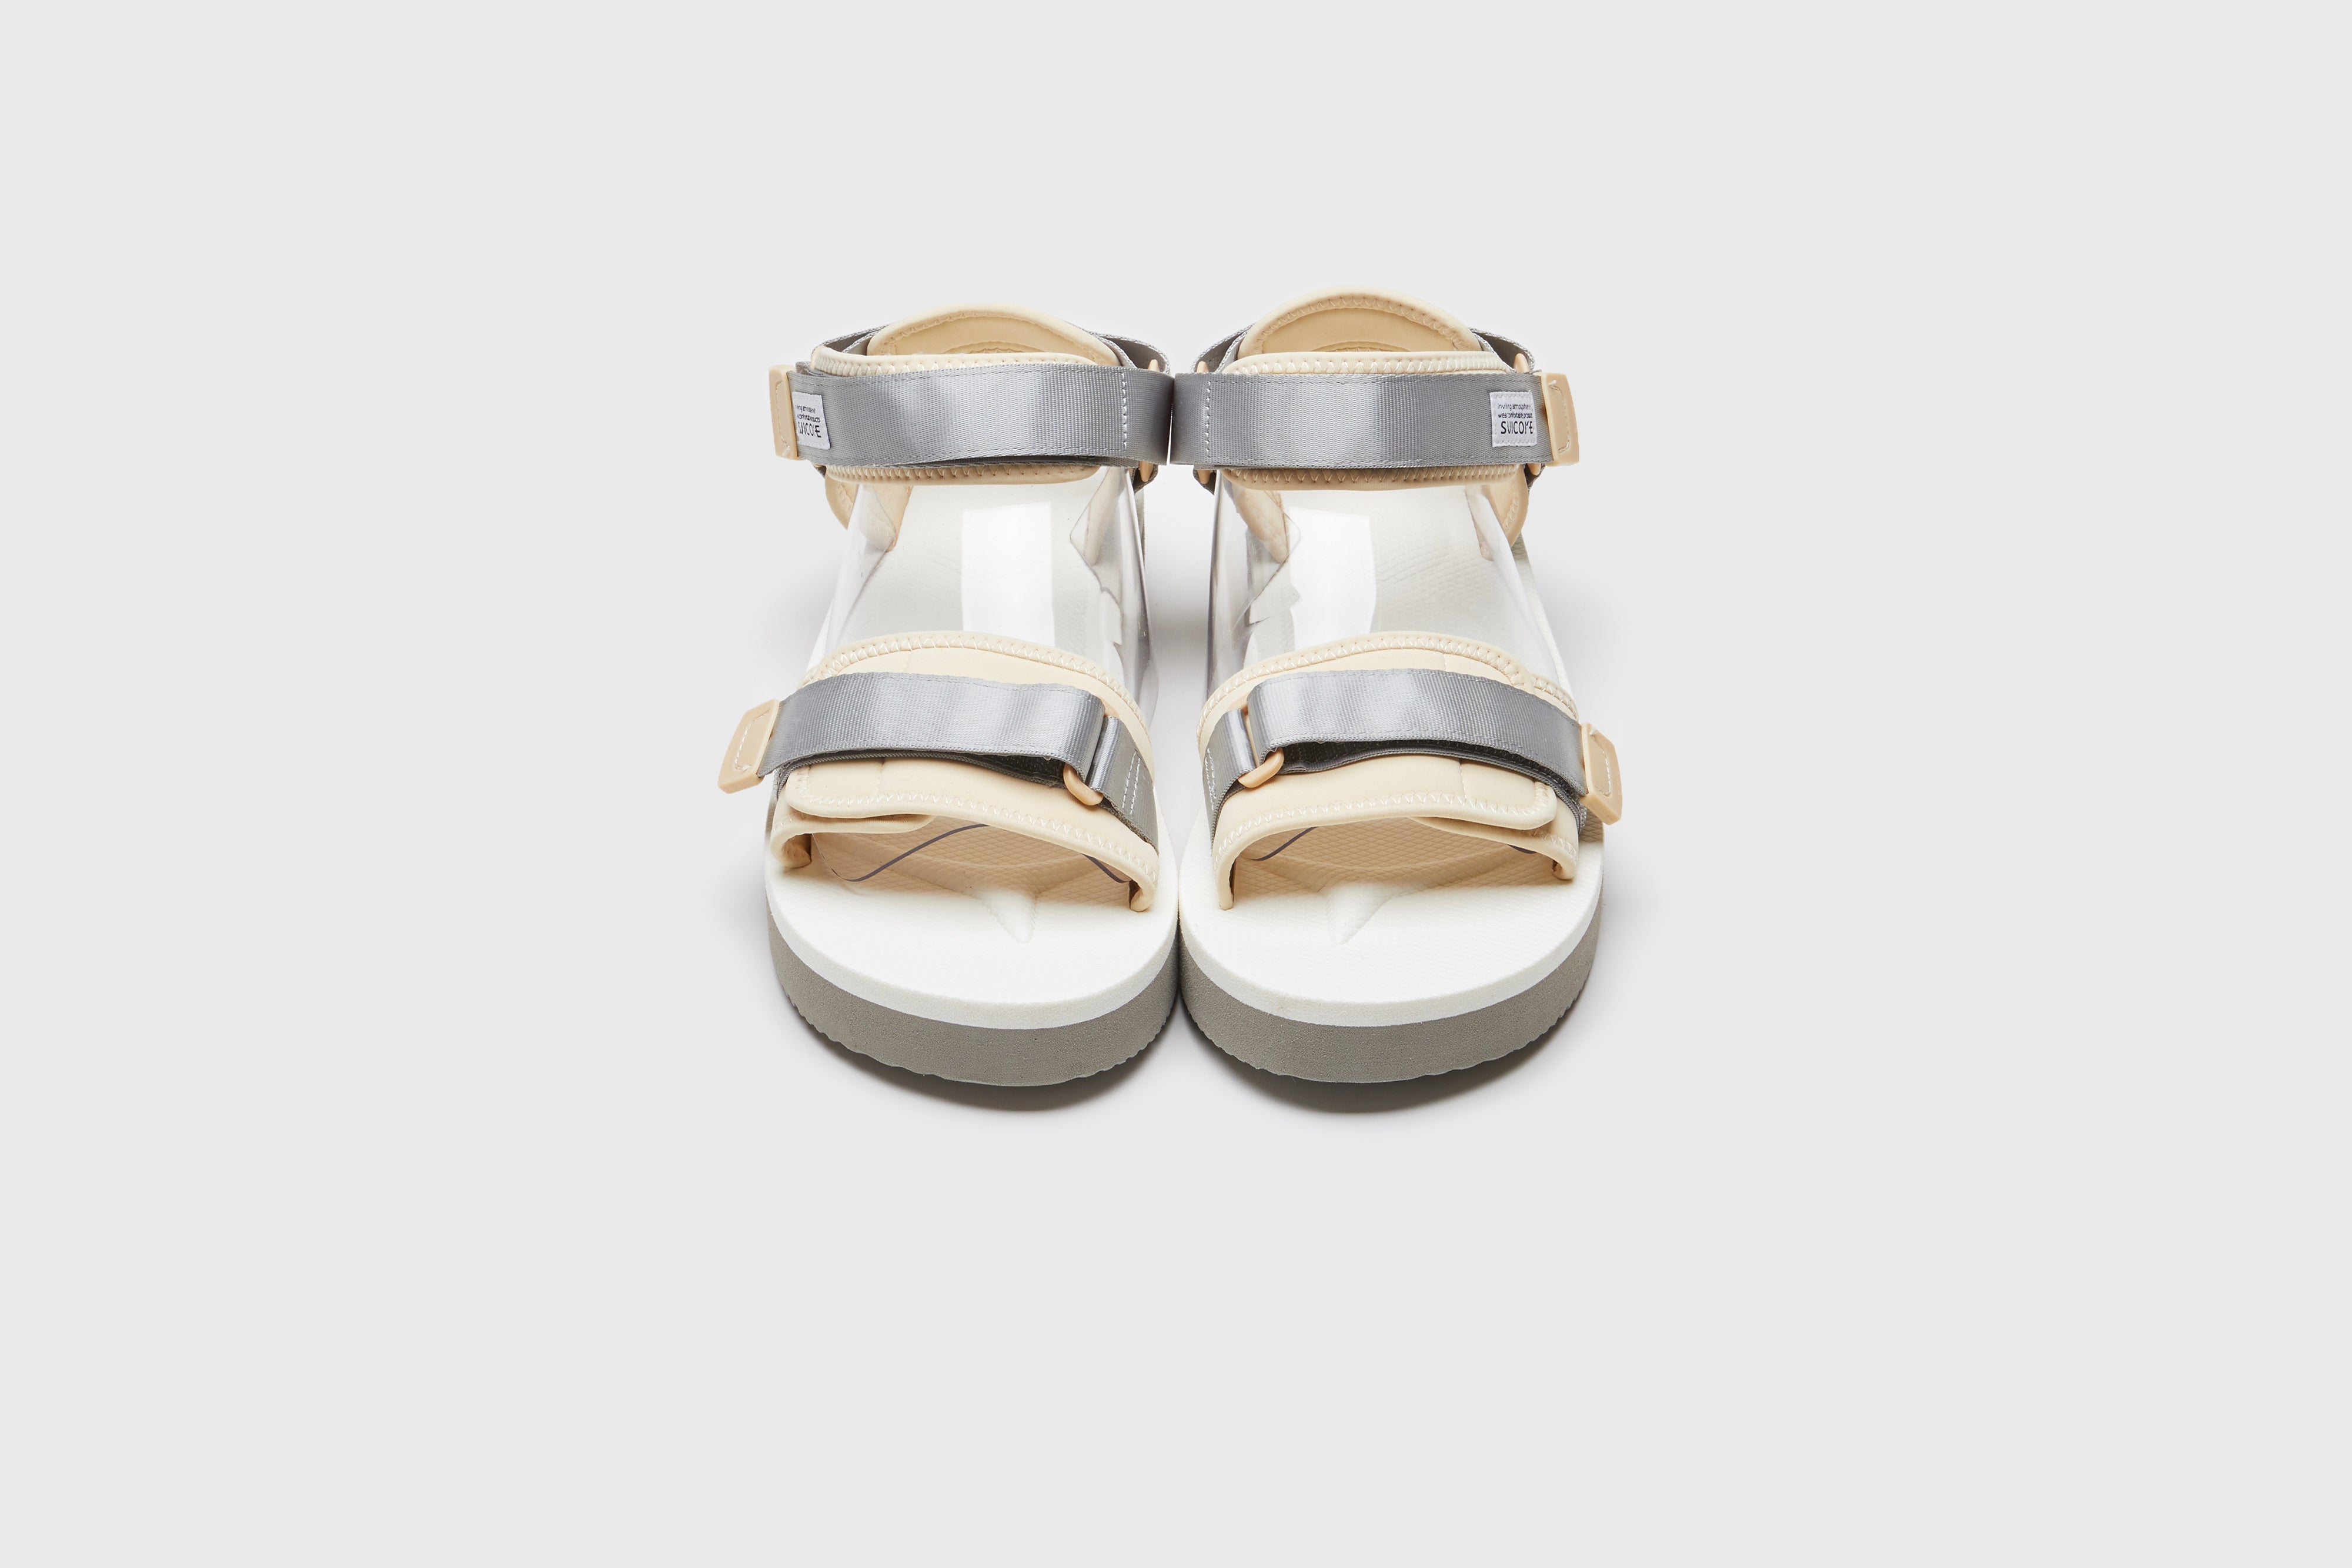 SUICOKE CEL-PO sandals with gray &amp; white nylon upper, gray &amp; white midsole and sole, strap and logo patch. From Spring/Summer 2023 collection on eightywingold Web Store, an official partner of SUICOKE. OG-022PO GRAY X WHITE